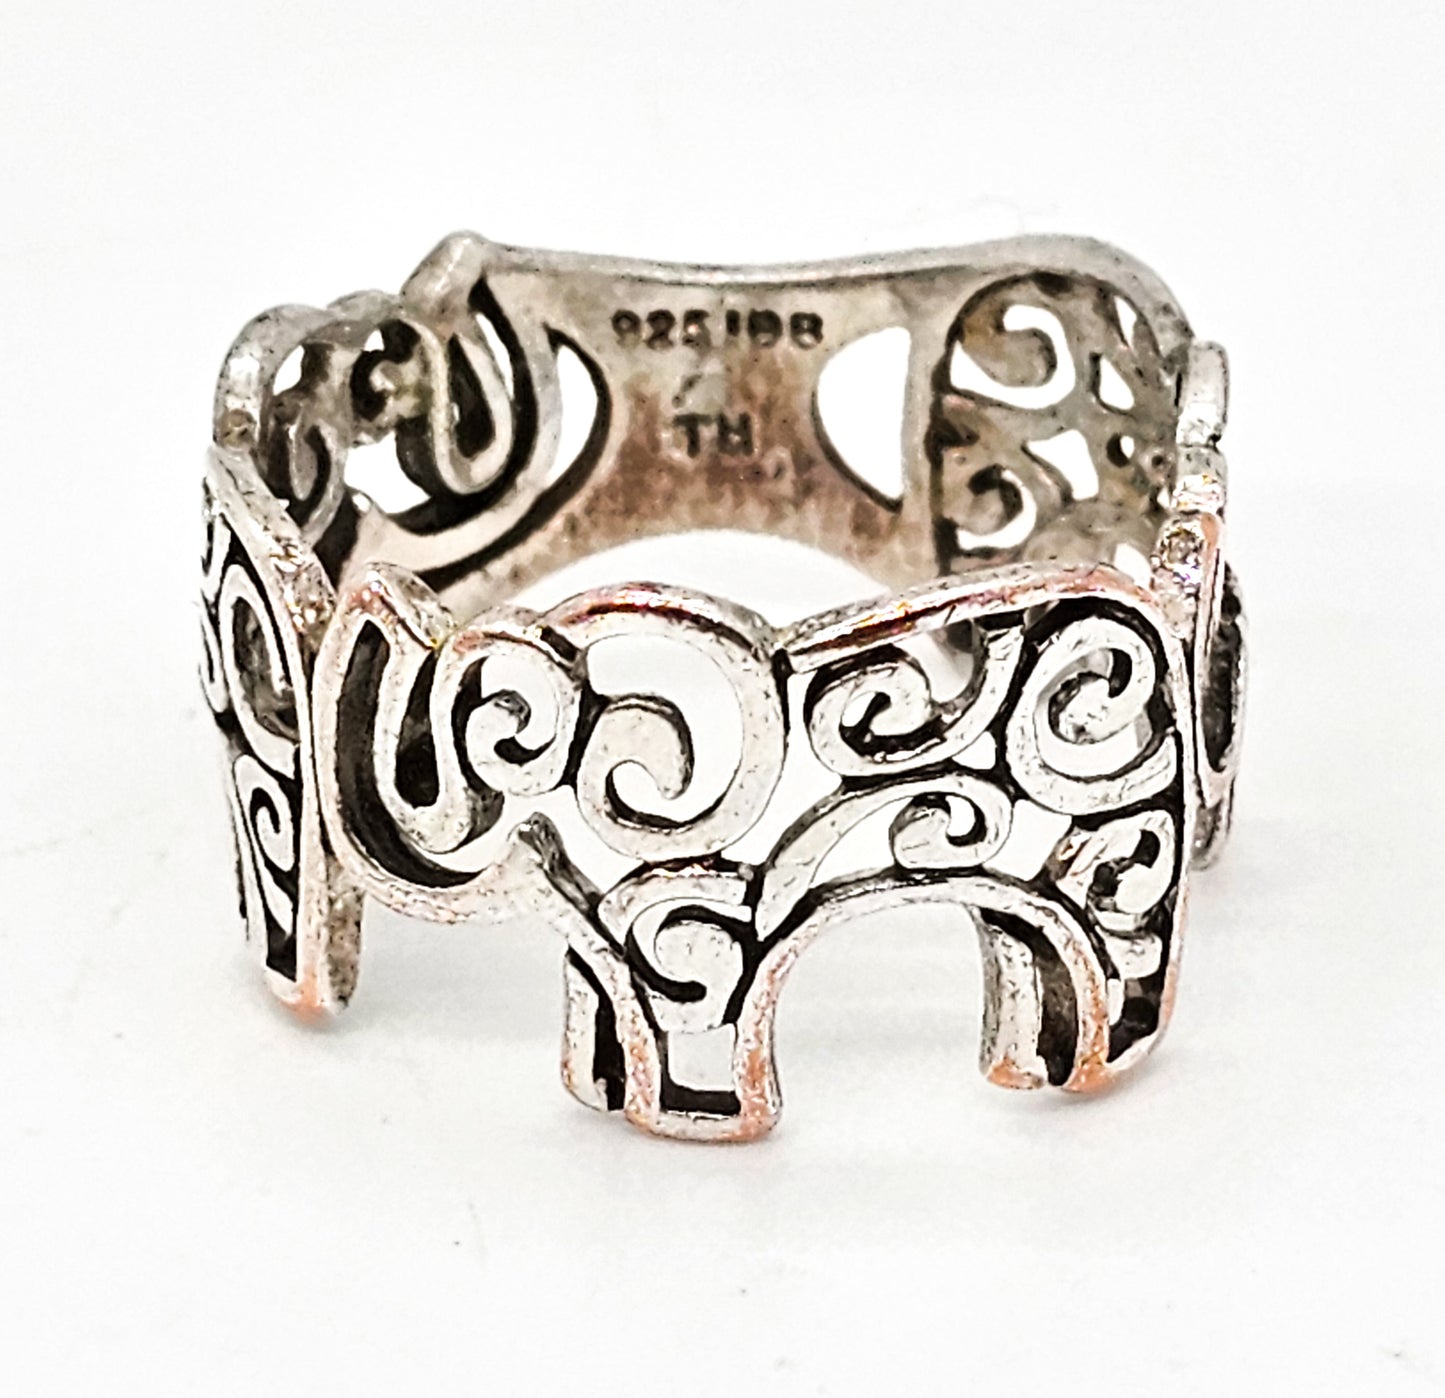 Filigree Elephant Good Luck Trunk vintage open work sterling silver ring size 8